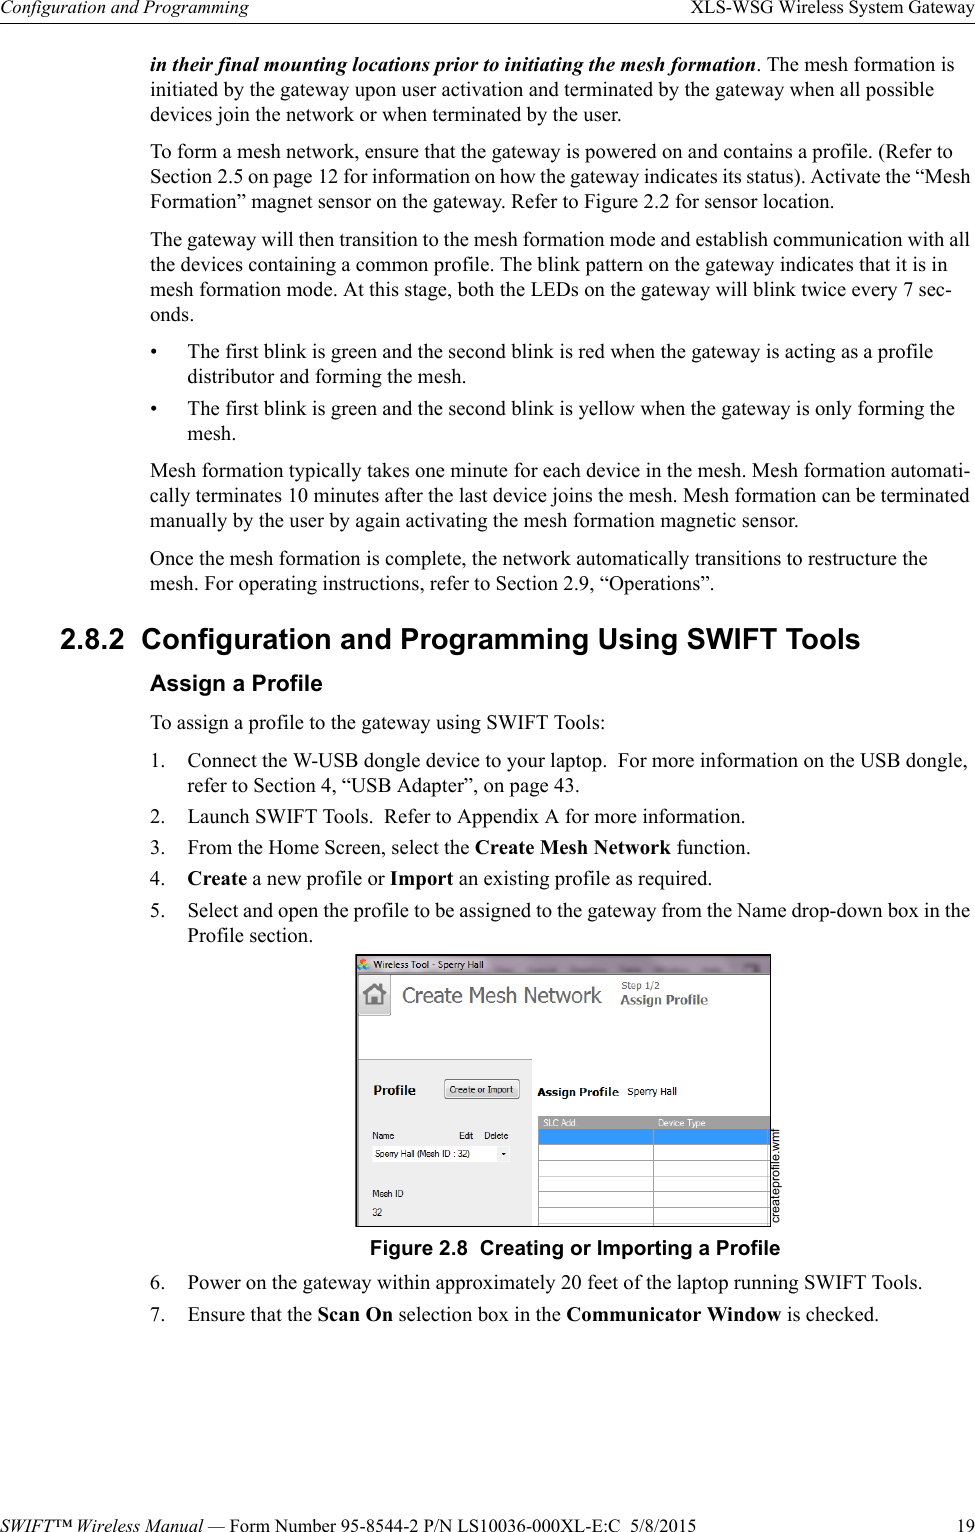 SWIFT™ Wireless Manual — Form Number 95-8544-2 P/N LS10036-000XL-E:C  5/8/2015  19Configuration and Programming XLS-WSG Wireless System Gatewayin their final mounting locations prior to initiating the mesh formation. The mesh formation is initiated by the gateway upon user activation and terminated by the gateway when all possible devices join the network or when terminated by the user.To form a mesh network, ensure that the gateway is powered on and contains a profile. (Refer to Section 2.5 on page 12 for information on how the gateway indicates its status). Activate the “Mesh Formation” magnet sensor on the gateway. Refer to Figure 2.2 for sensor location.The gateway will then transition to the mesh formation mode and establish communication with all the devices containing a common profile. The blink pattern on the gateway indicates that it is in mesh formation mode. At this stage, both the LEDs on the gateway will blink twice every 7 sec-onds. • The first blink is green and the second blink is red when the gateway is acting as a profile distributor and forming the mesh. • The first blink is green and the second blink is yellow when the gateway is only forming the mesh. Mesh formation typically takes one minute for each device in the mesh. Mesh formation automati-cally terminates 10 minutes after the last device joins the mesh. Mesh formation can be terminated manually by the user by again activating the mesh formation magnetic sensor. Once the mesh formation is complete, the network automatically transitions to restructure the mesh. For operating instructions, refer to Section 2.9, “Operations”.2.8.2  Configuration and Programming Using SWIFT ToolsAssign a ProfileTo assign a profile to the gateway using SWIFT Tools:1. Connect the W-USB dongle device to your laptop.  For more information on the USB dongle, refer to Section 4, “USB Adapter”, on page 43.2. Launch SWIFT Tools.  Refer to Appendix A for more information.3. From the Home Screen, select the Create Mesh Network function.4. Create a new profile or Import an existing profile as required.5. Select and open the profile to be assigned to the gateway from the Name drop-down box in the Profile section.     6. Power on the gateway within approximately 20 feet of the laptop running SWIFT Tools.7. Ensure that the Scan On selection box in the Communicator Window is checked.Figure 2.8  Creating or Importing a Profilecreateprofile.wmf